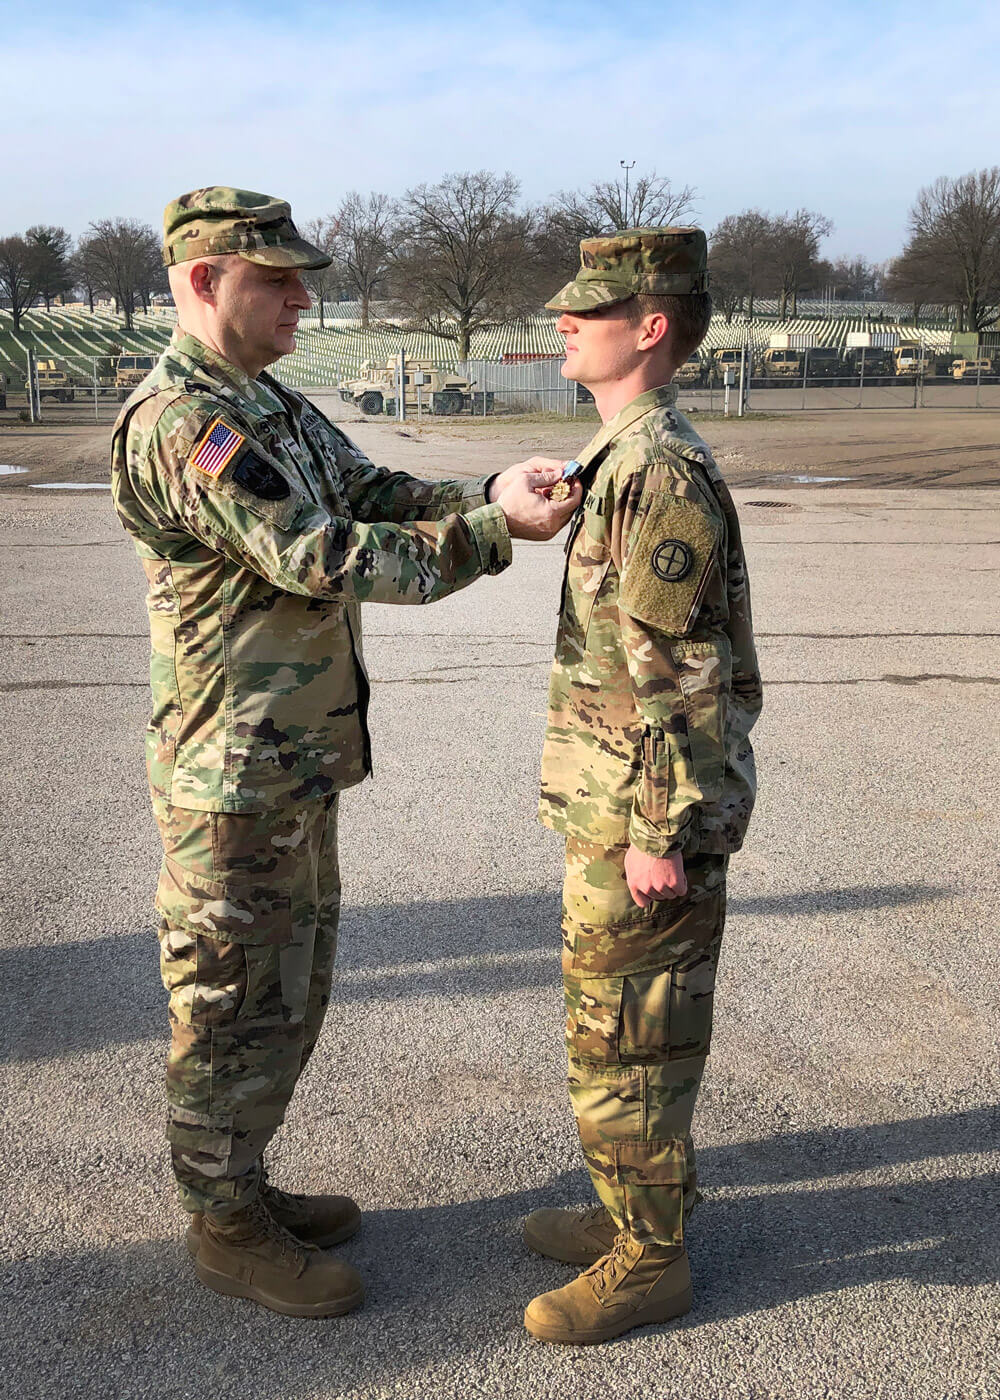 LTC Joshua Stewart (left), a division chief with the U.S. Transportation Command, presents Missouri Army National Guard Solider SPC Taylen Winchell with the Joint Service Achievement Medal at Jefferson Barracks, near St. Louis, April 2019. Missouri Army National Guard photo by MAJ Chris Morales